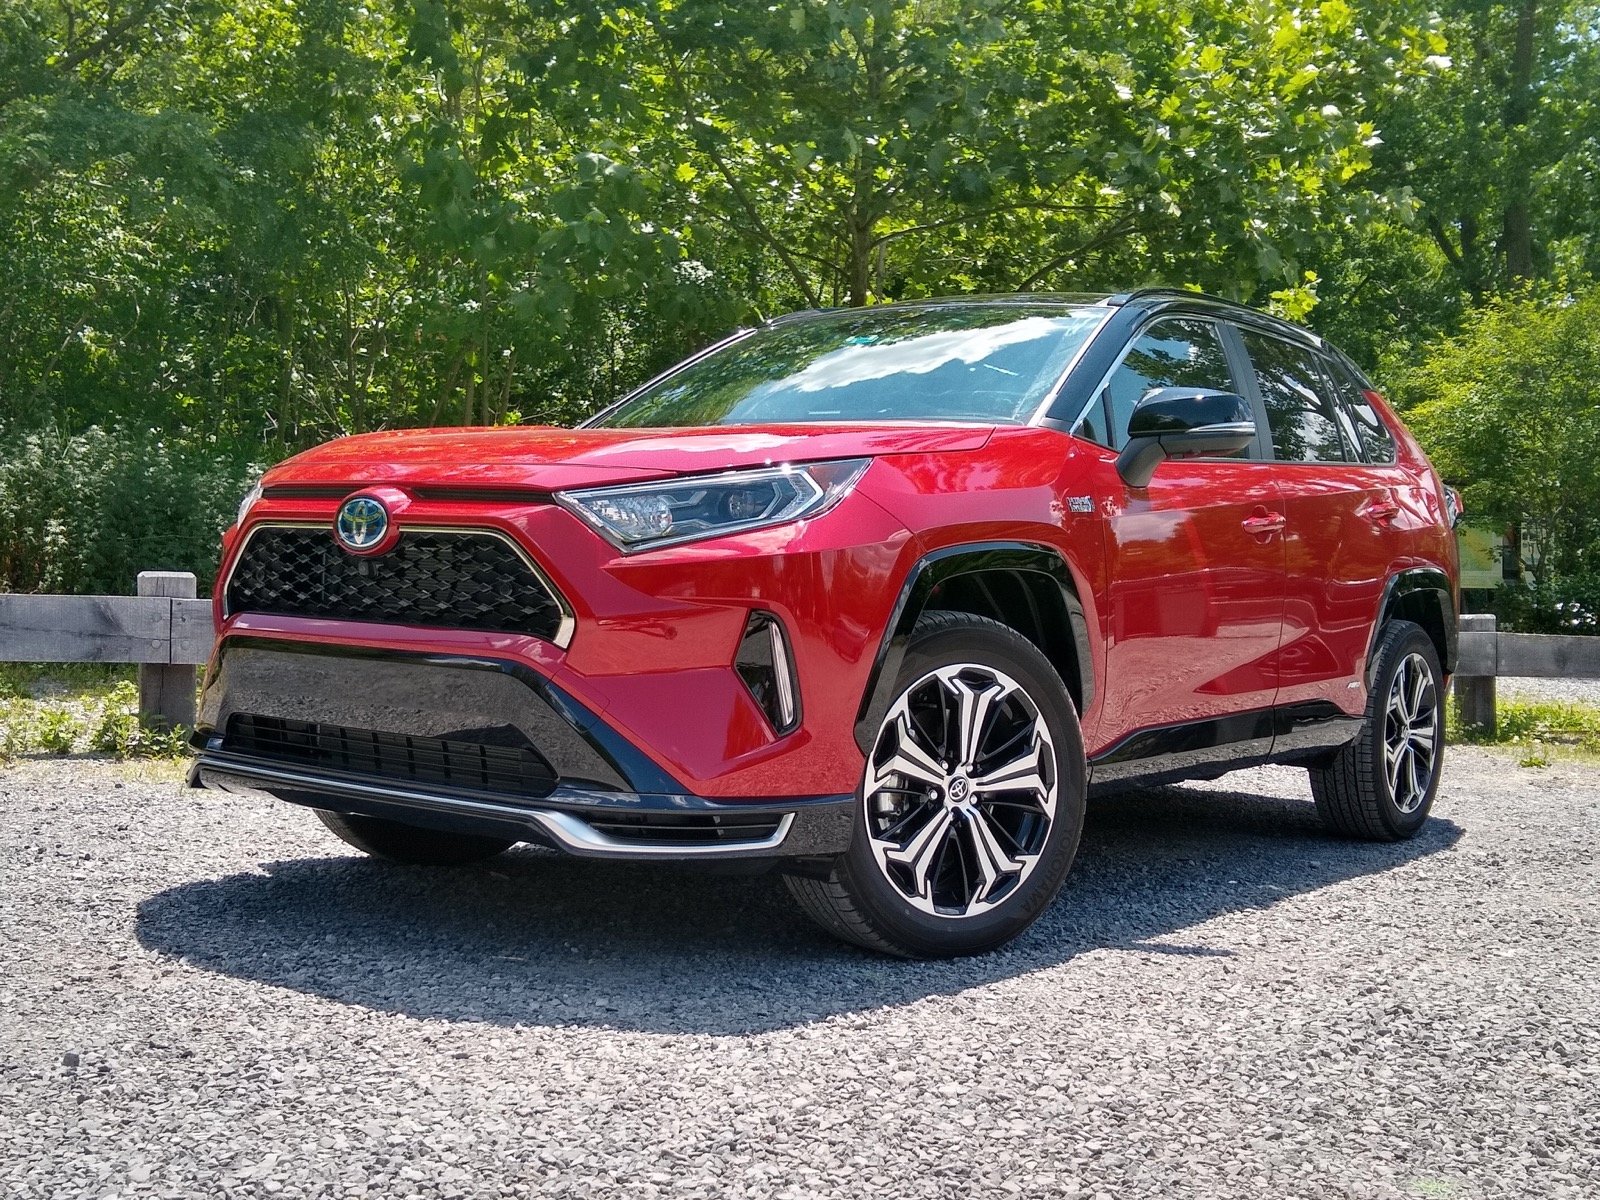 2021 Toyota RAV4 Prime Test Drive Review summaryImage